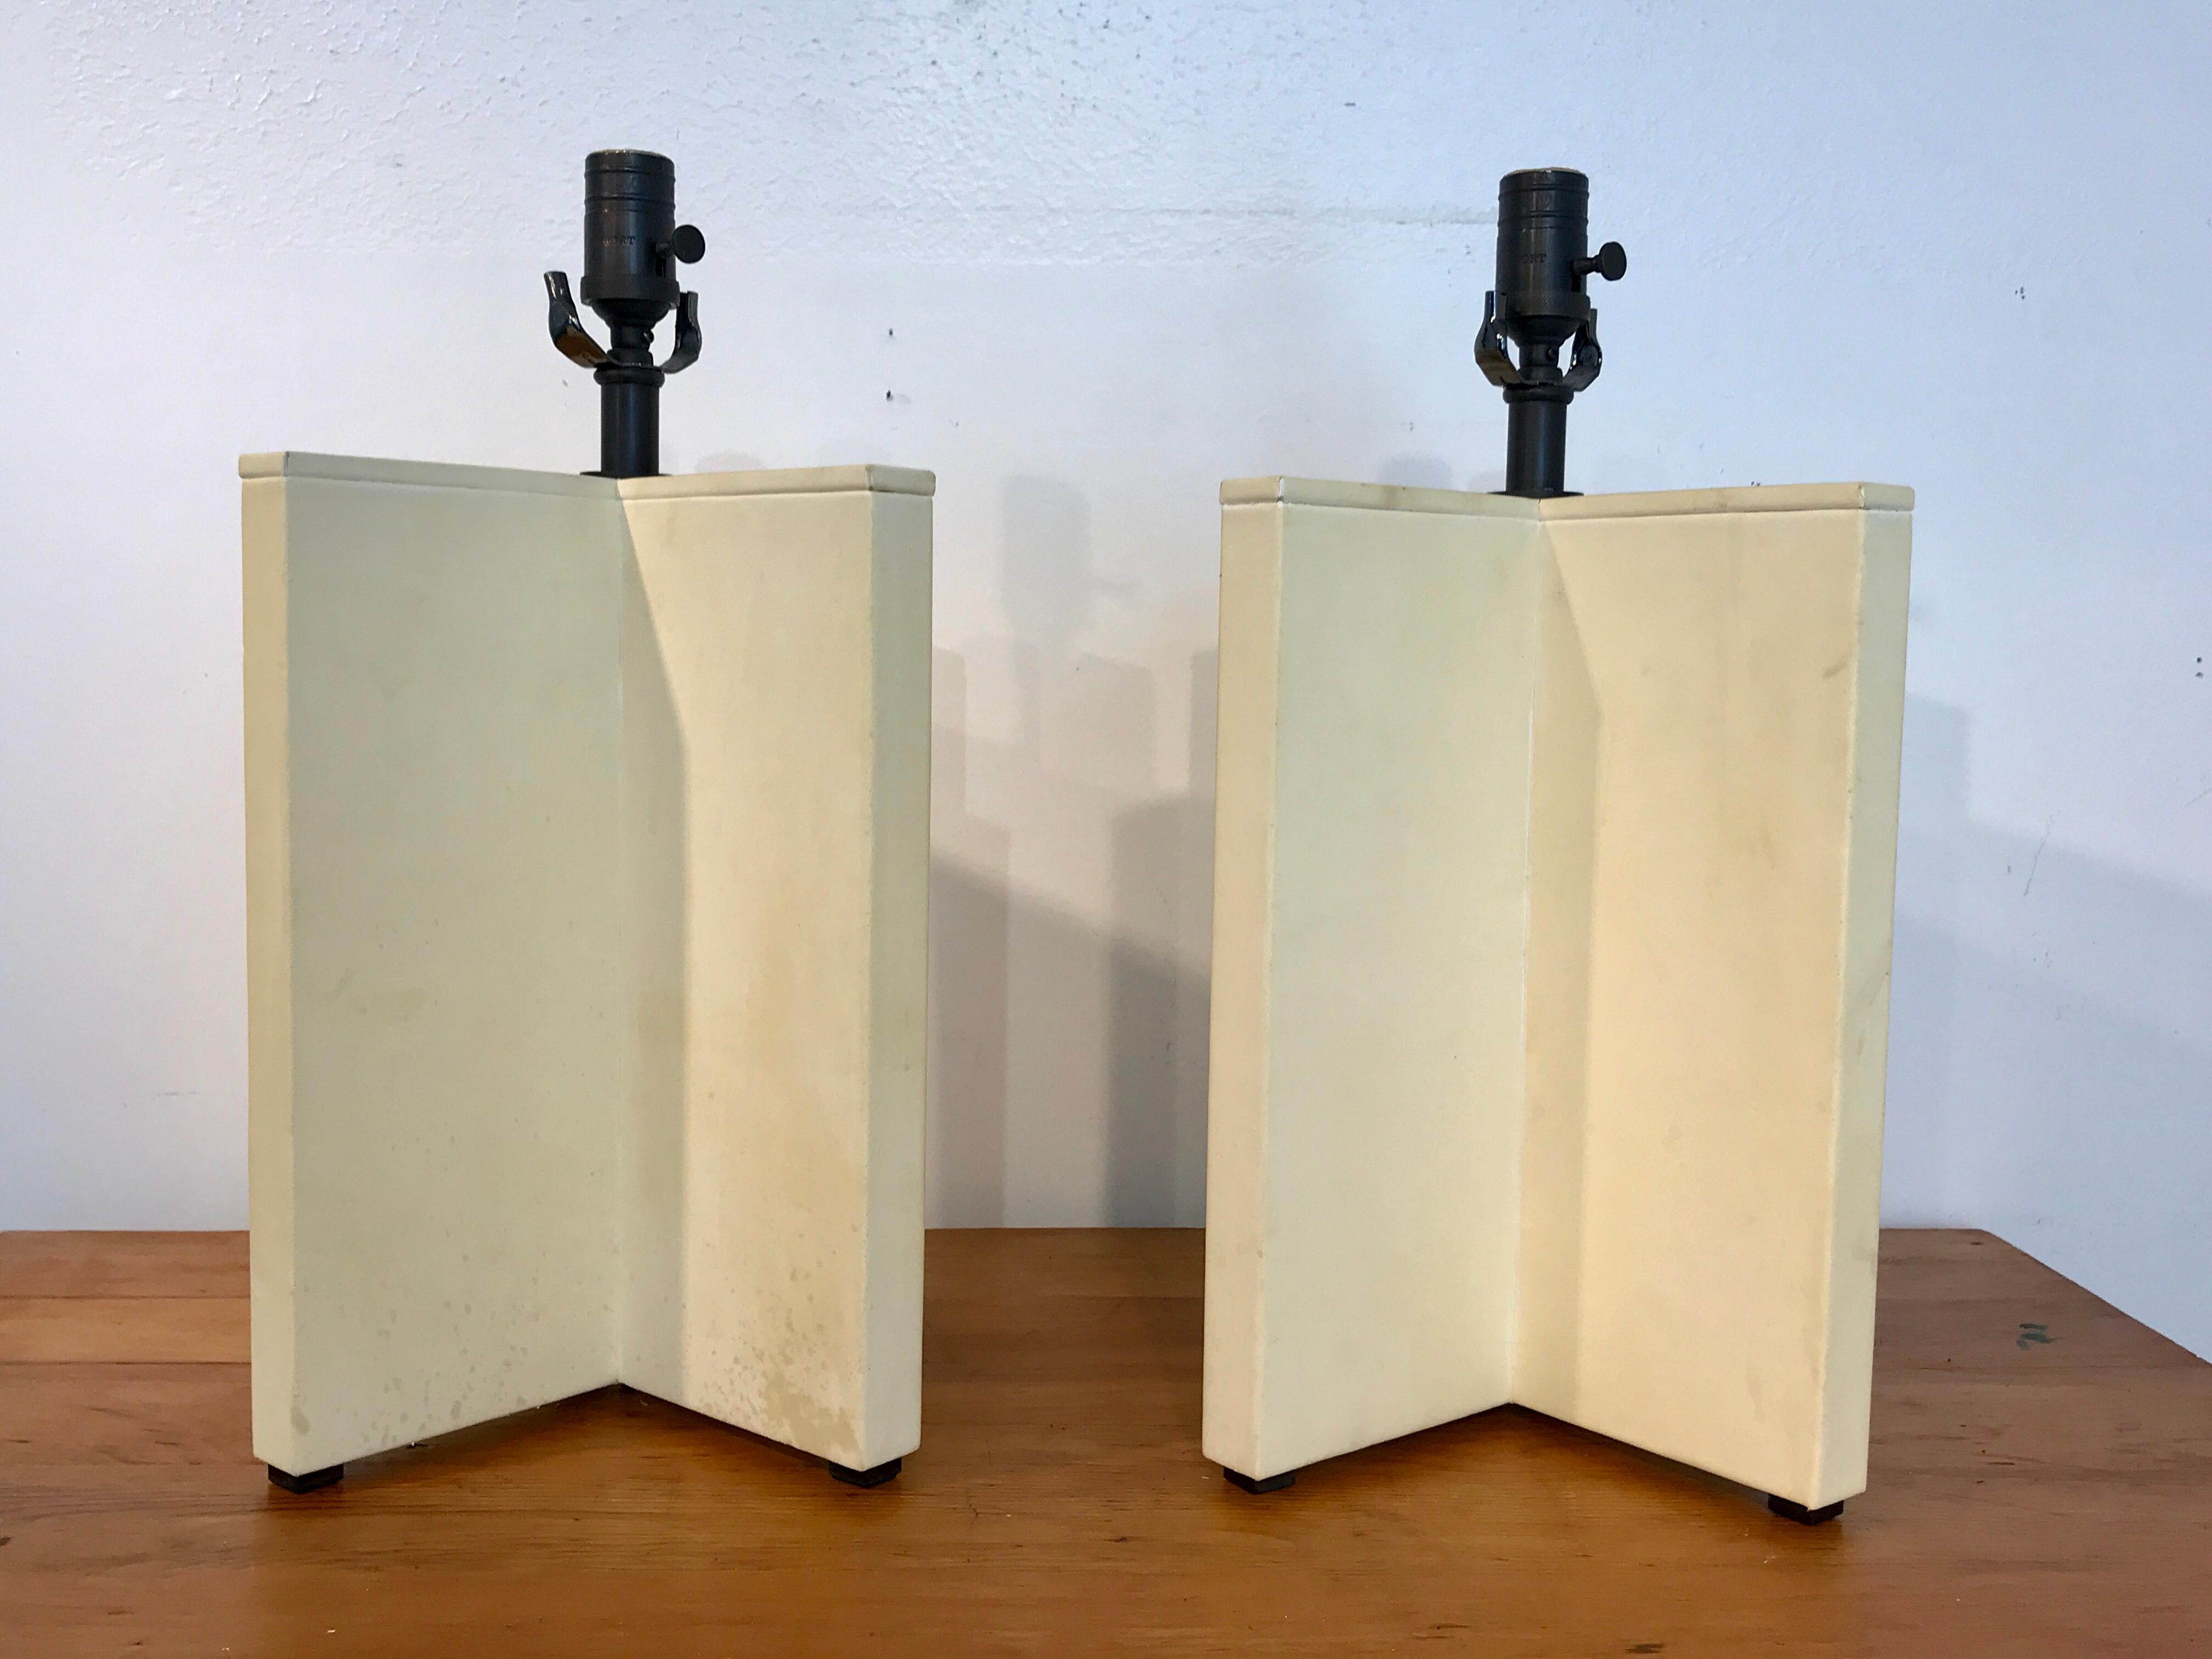 Parchment Leather Croisillon Lamps after Jean Michel Frank
A fine pair of Croisillon lamps in leather with beautiful aged patina and wear resembling parchment. Excellent quality raised on four bronze feet. Presents beautifully. Each lamp has a 12